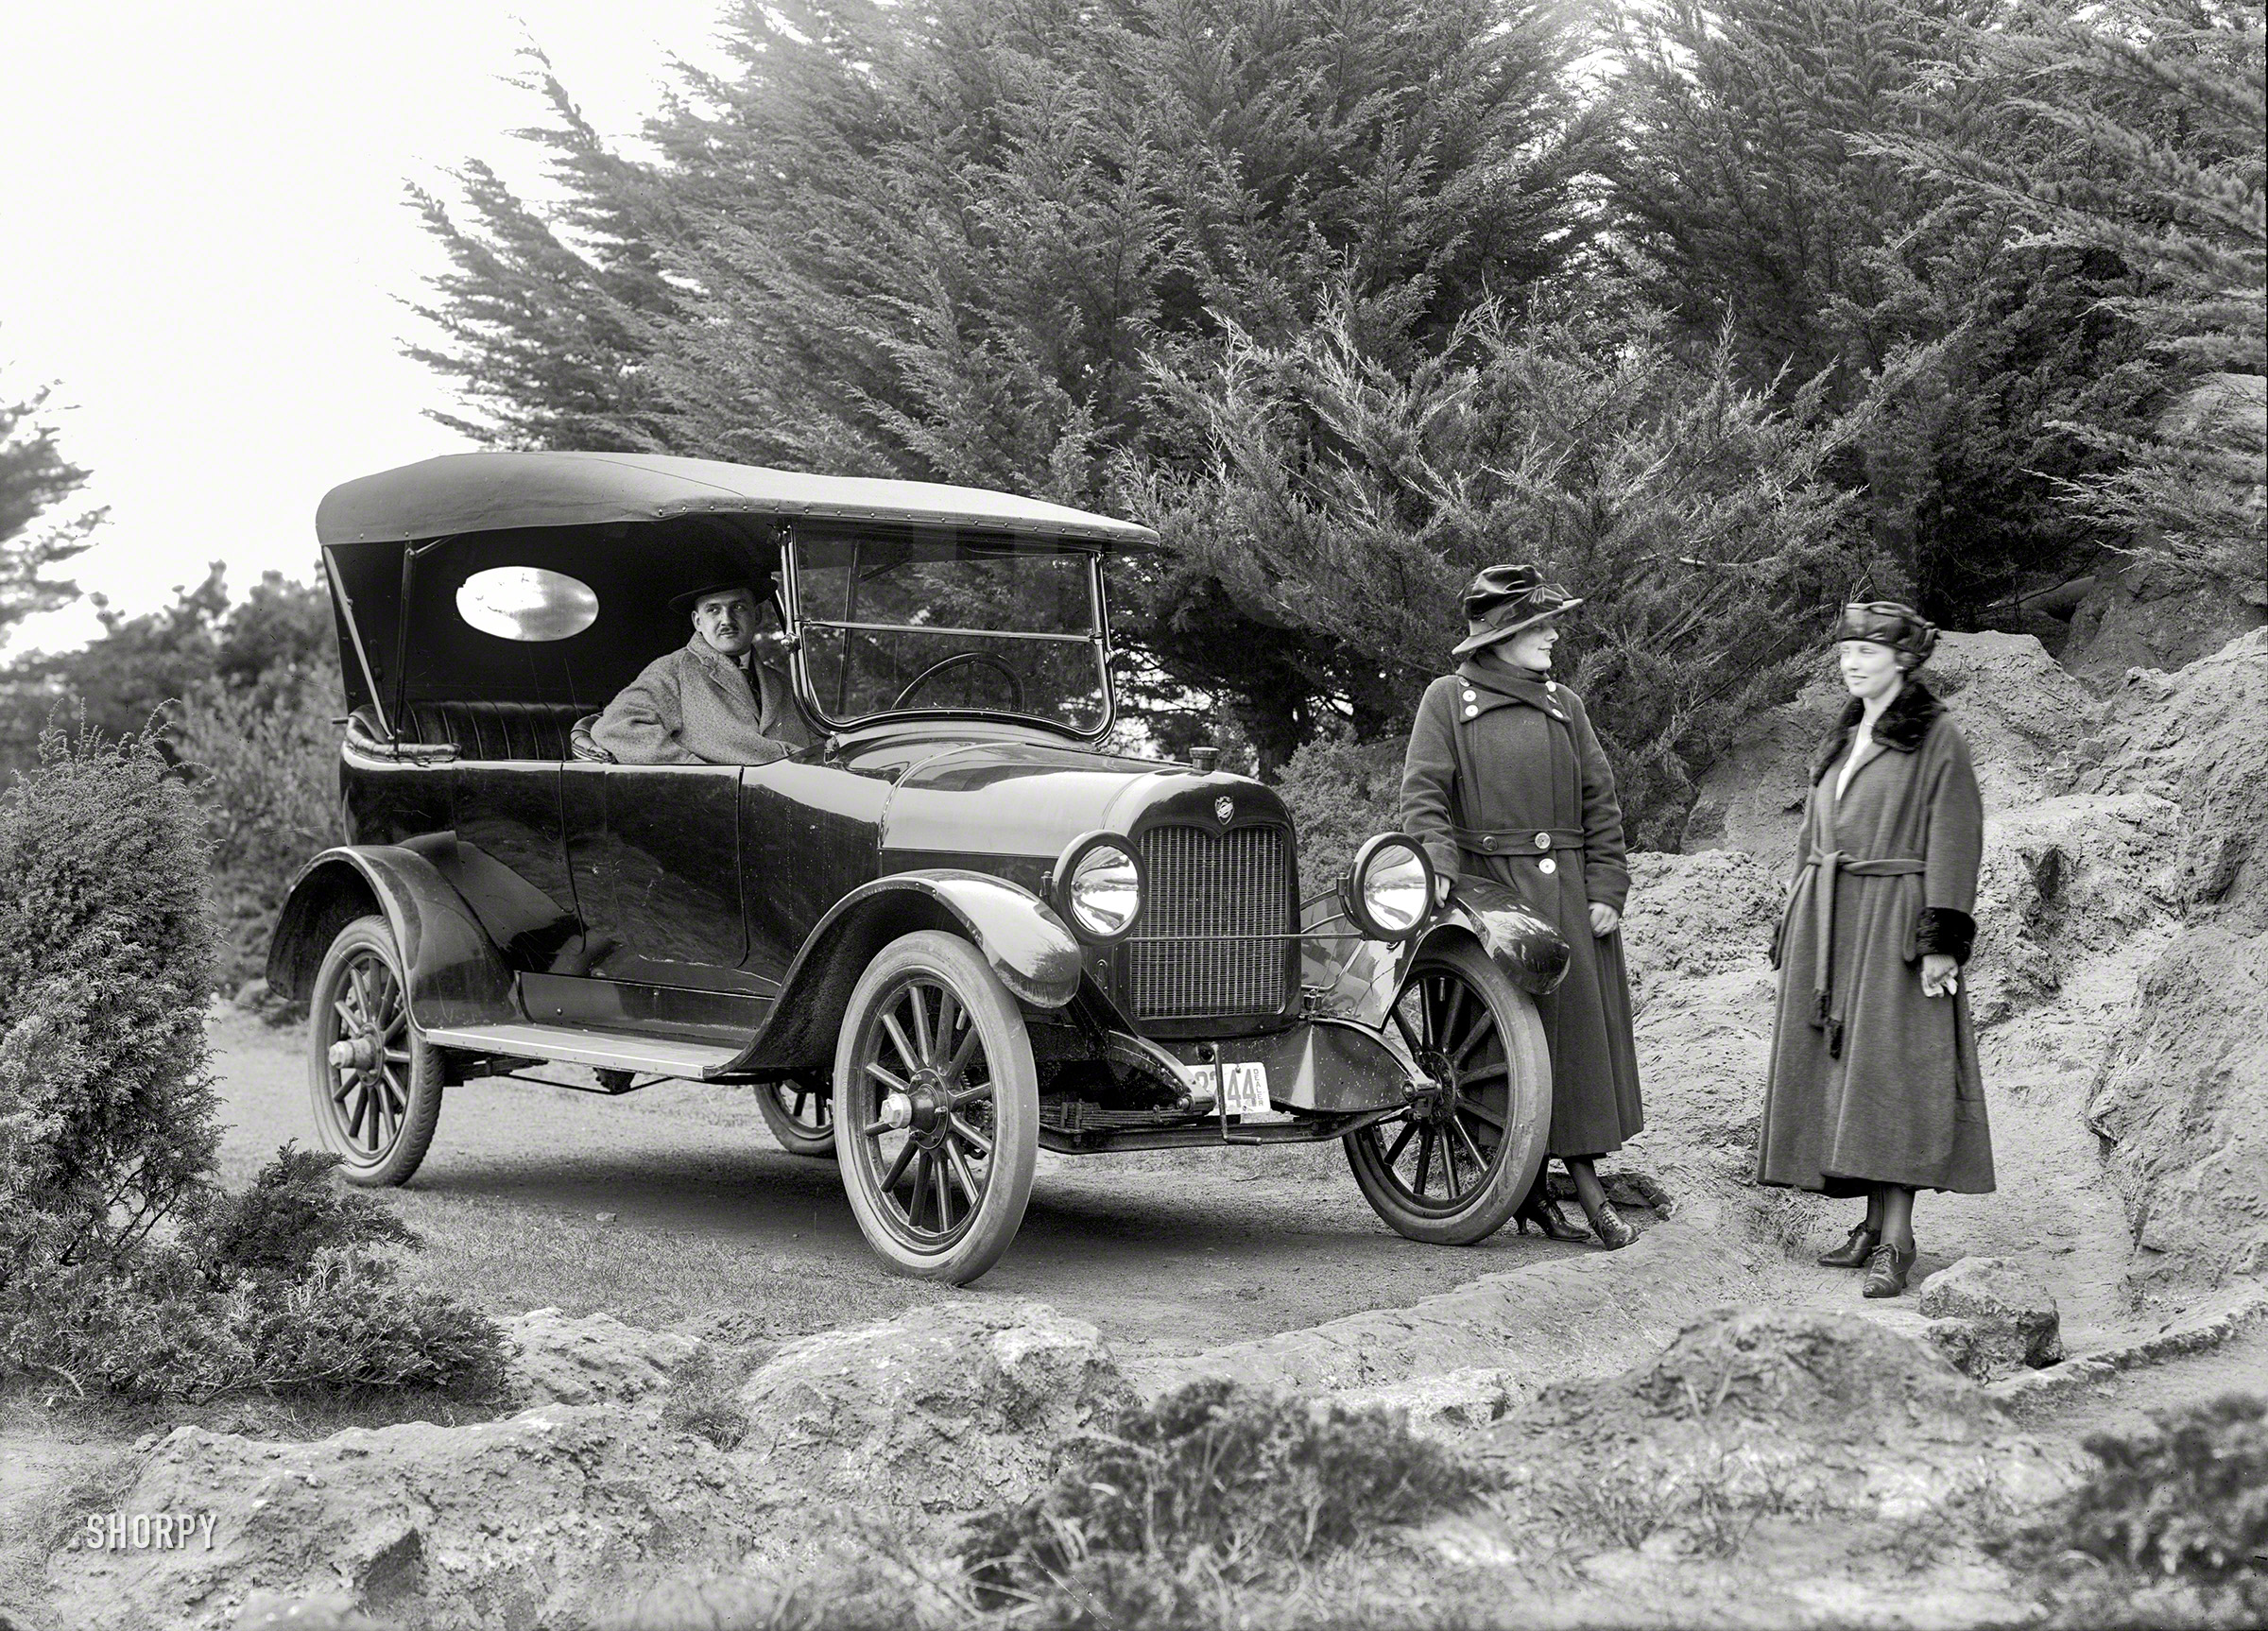 &nbsp; &nbsp; &nbsp; &nbsp; "Goodness, Isobel -- we seem to be out of gas!"
San Francisco circa 1919. "Maxwell touring car." Transporting its tourists on what looks to be a chilly day. 5x7 glass negative by Christopher Helin. View full size.